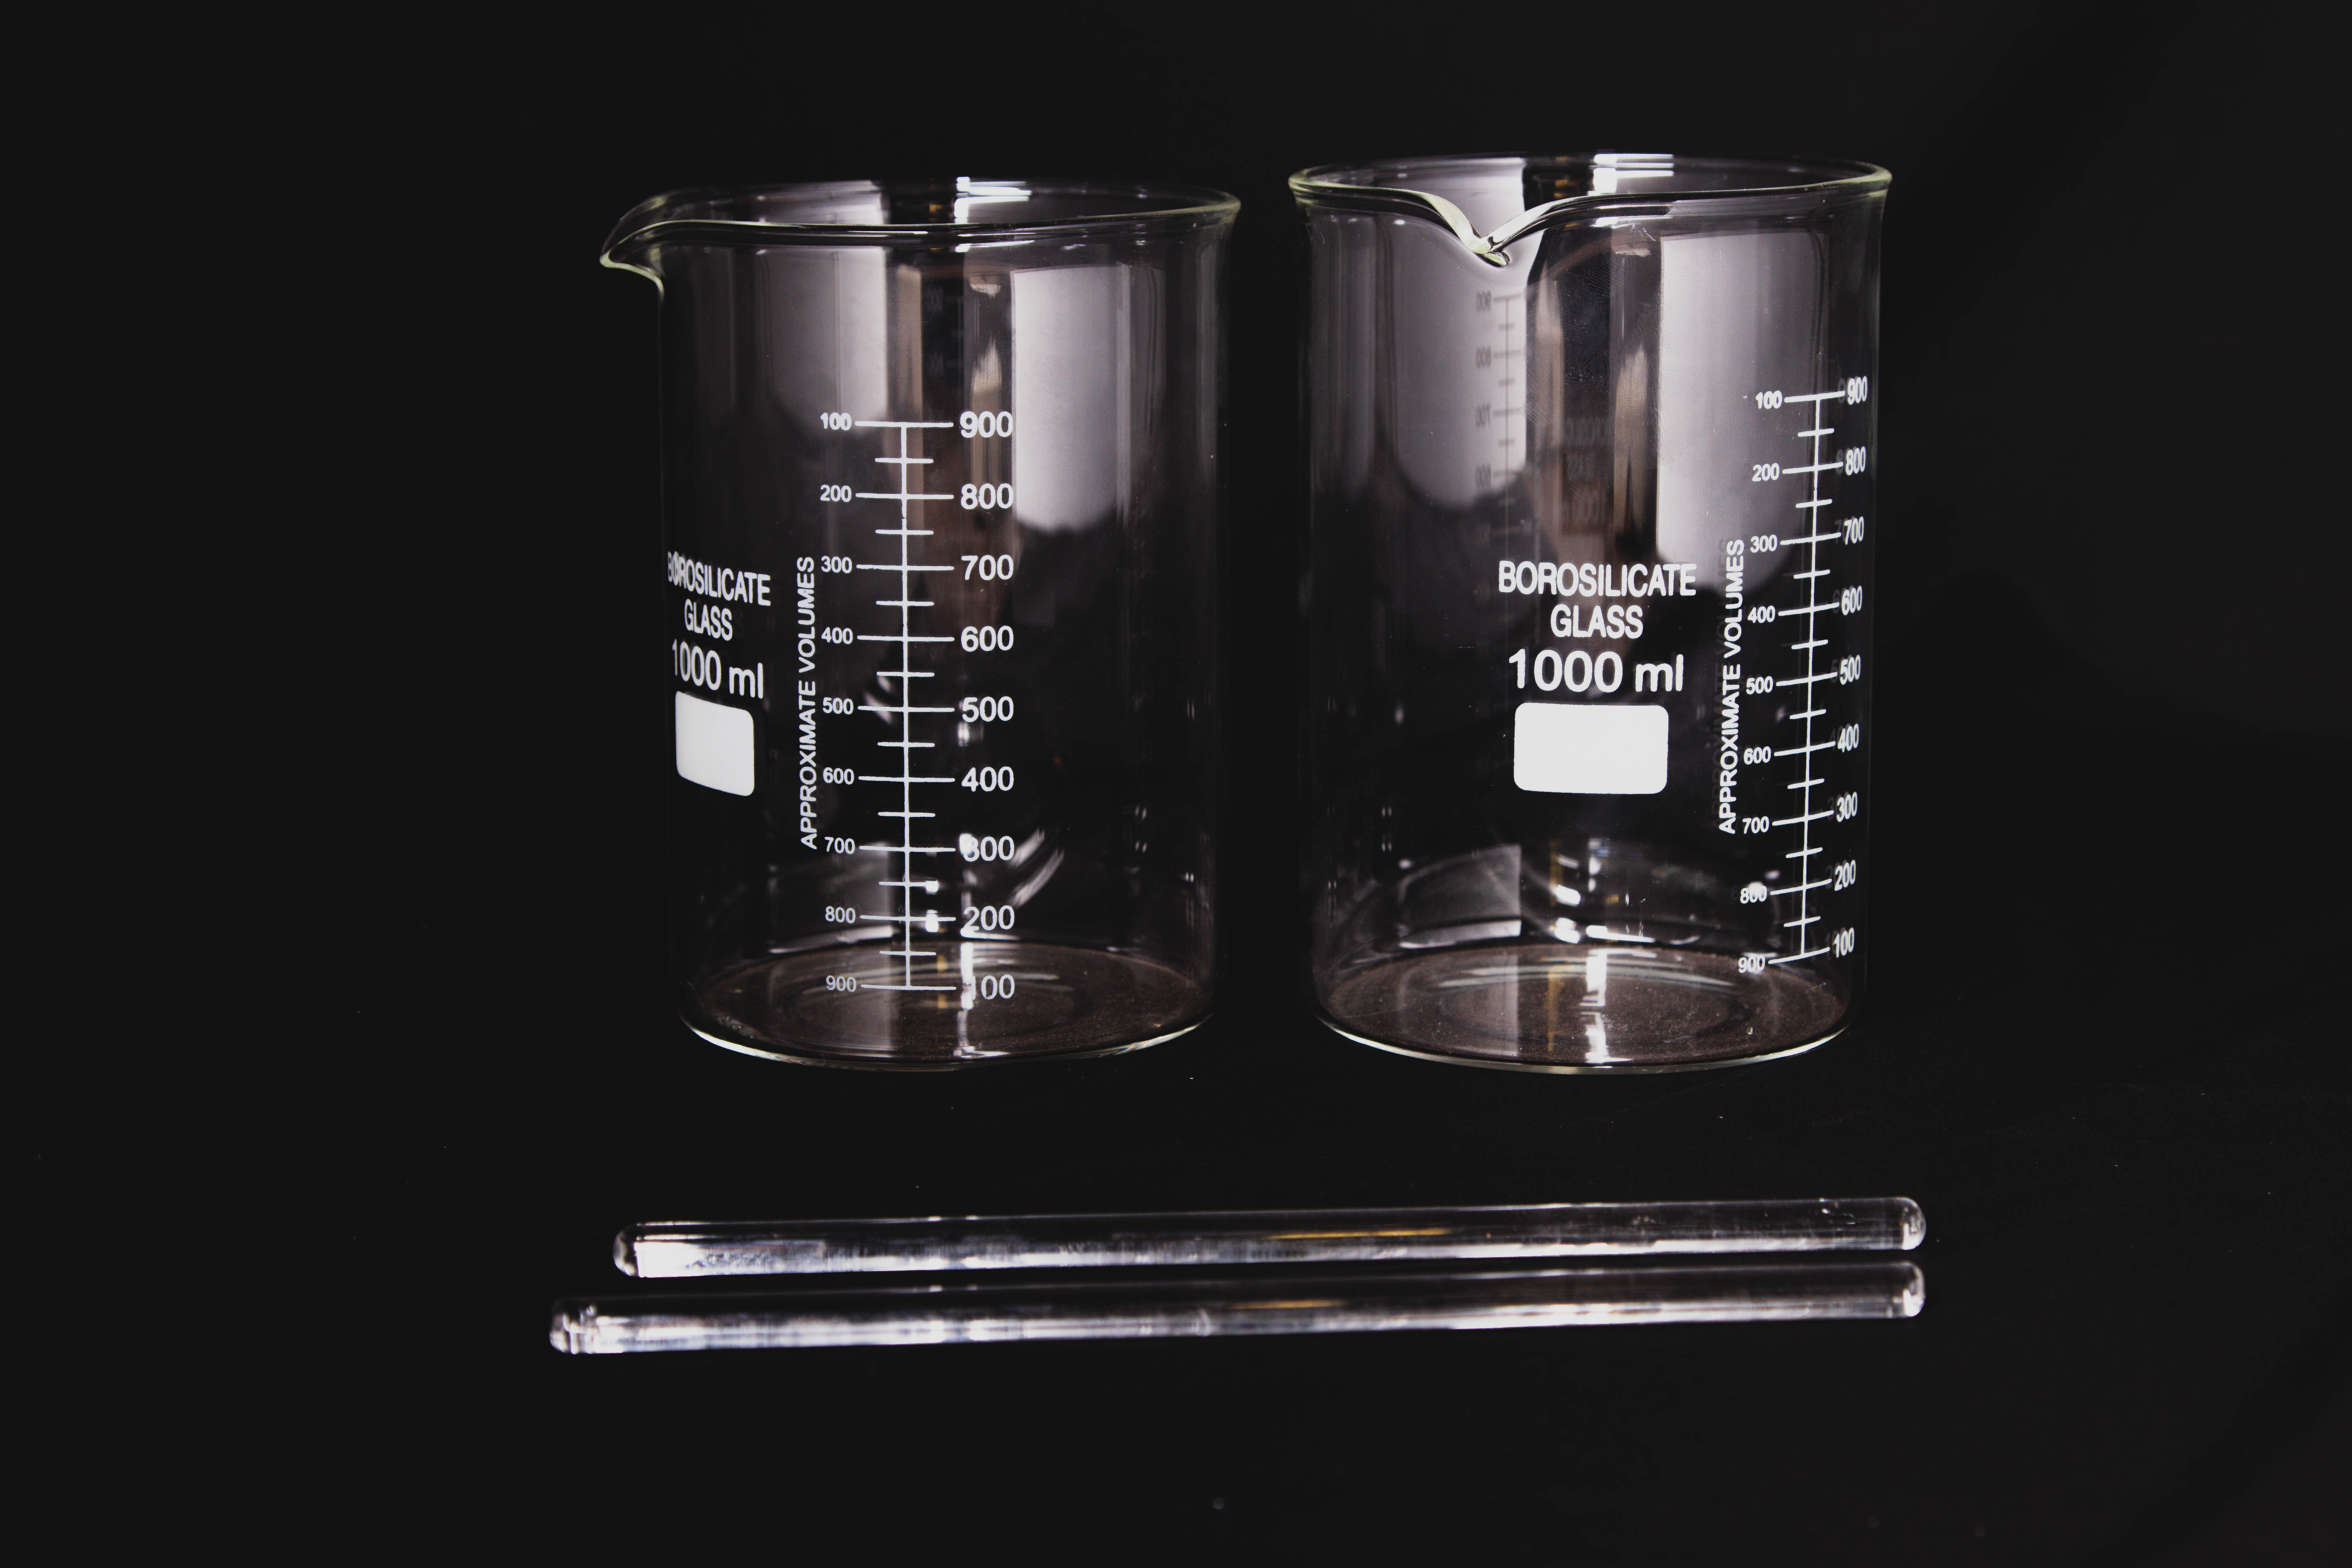 APPARATUS FOR DETERMINATION OF RESIDUE ON EVAPORATION - IS 8887